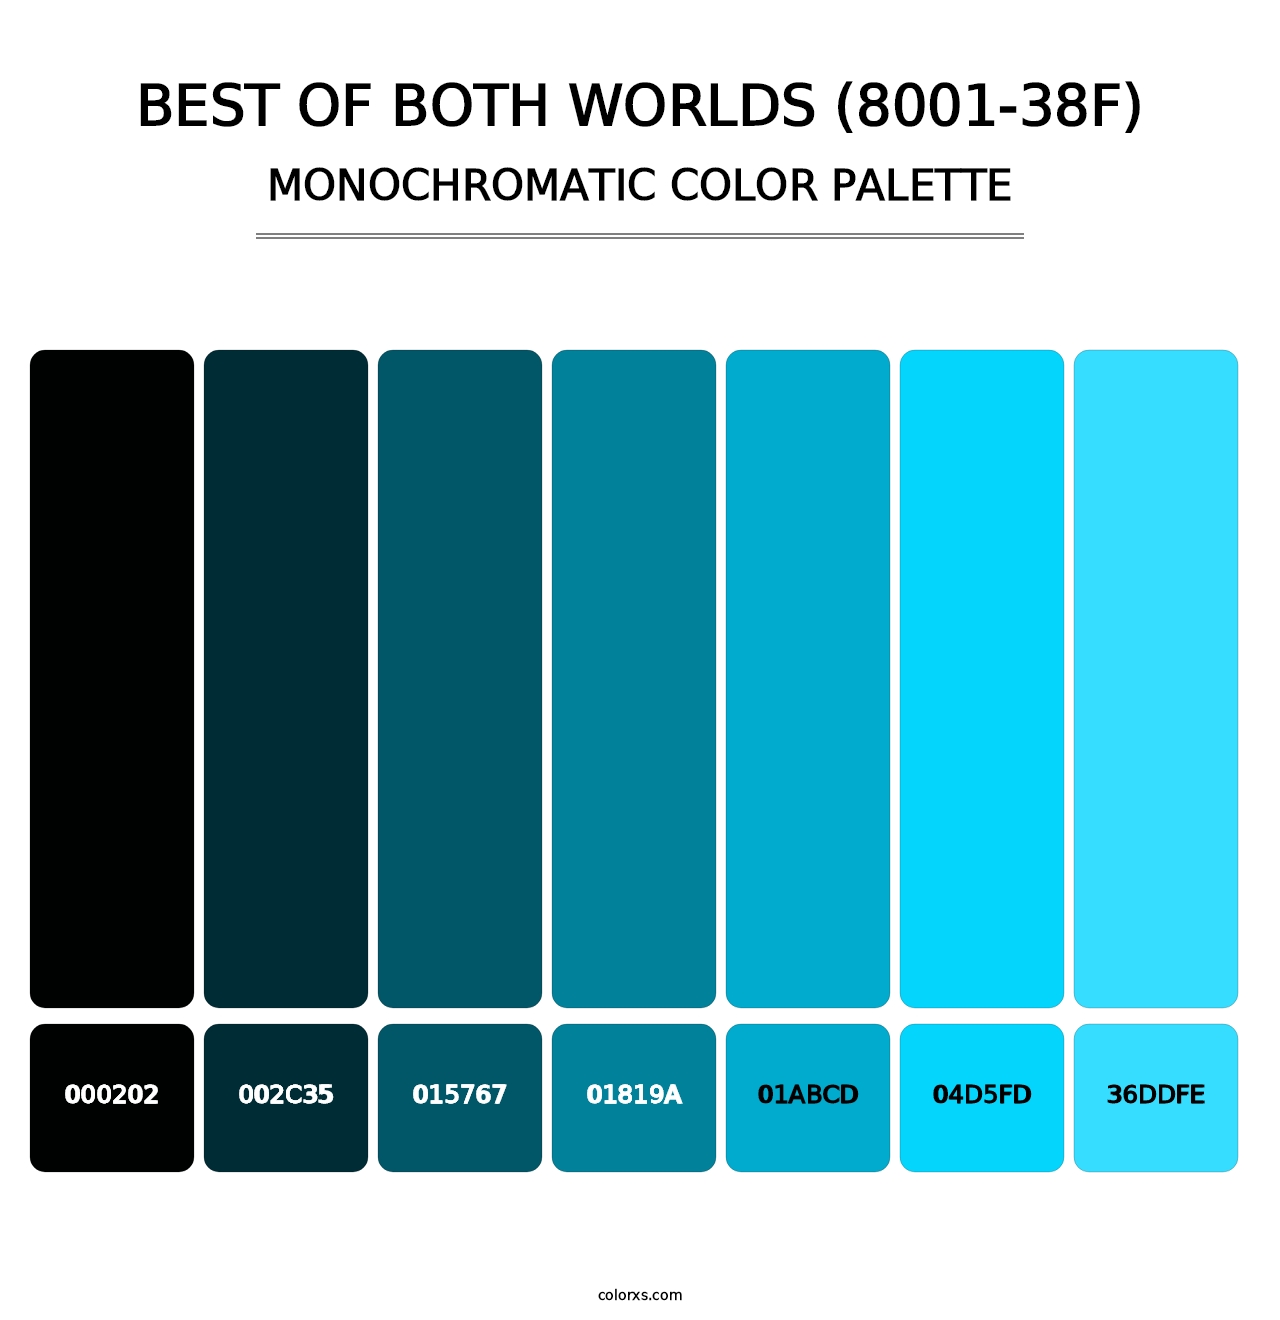 Best of Both Worlds (8001-38F) - Monochromatic Color Palette